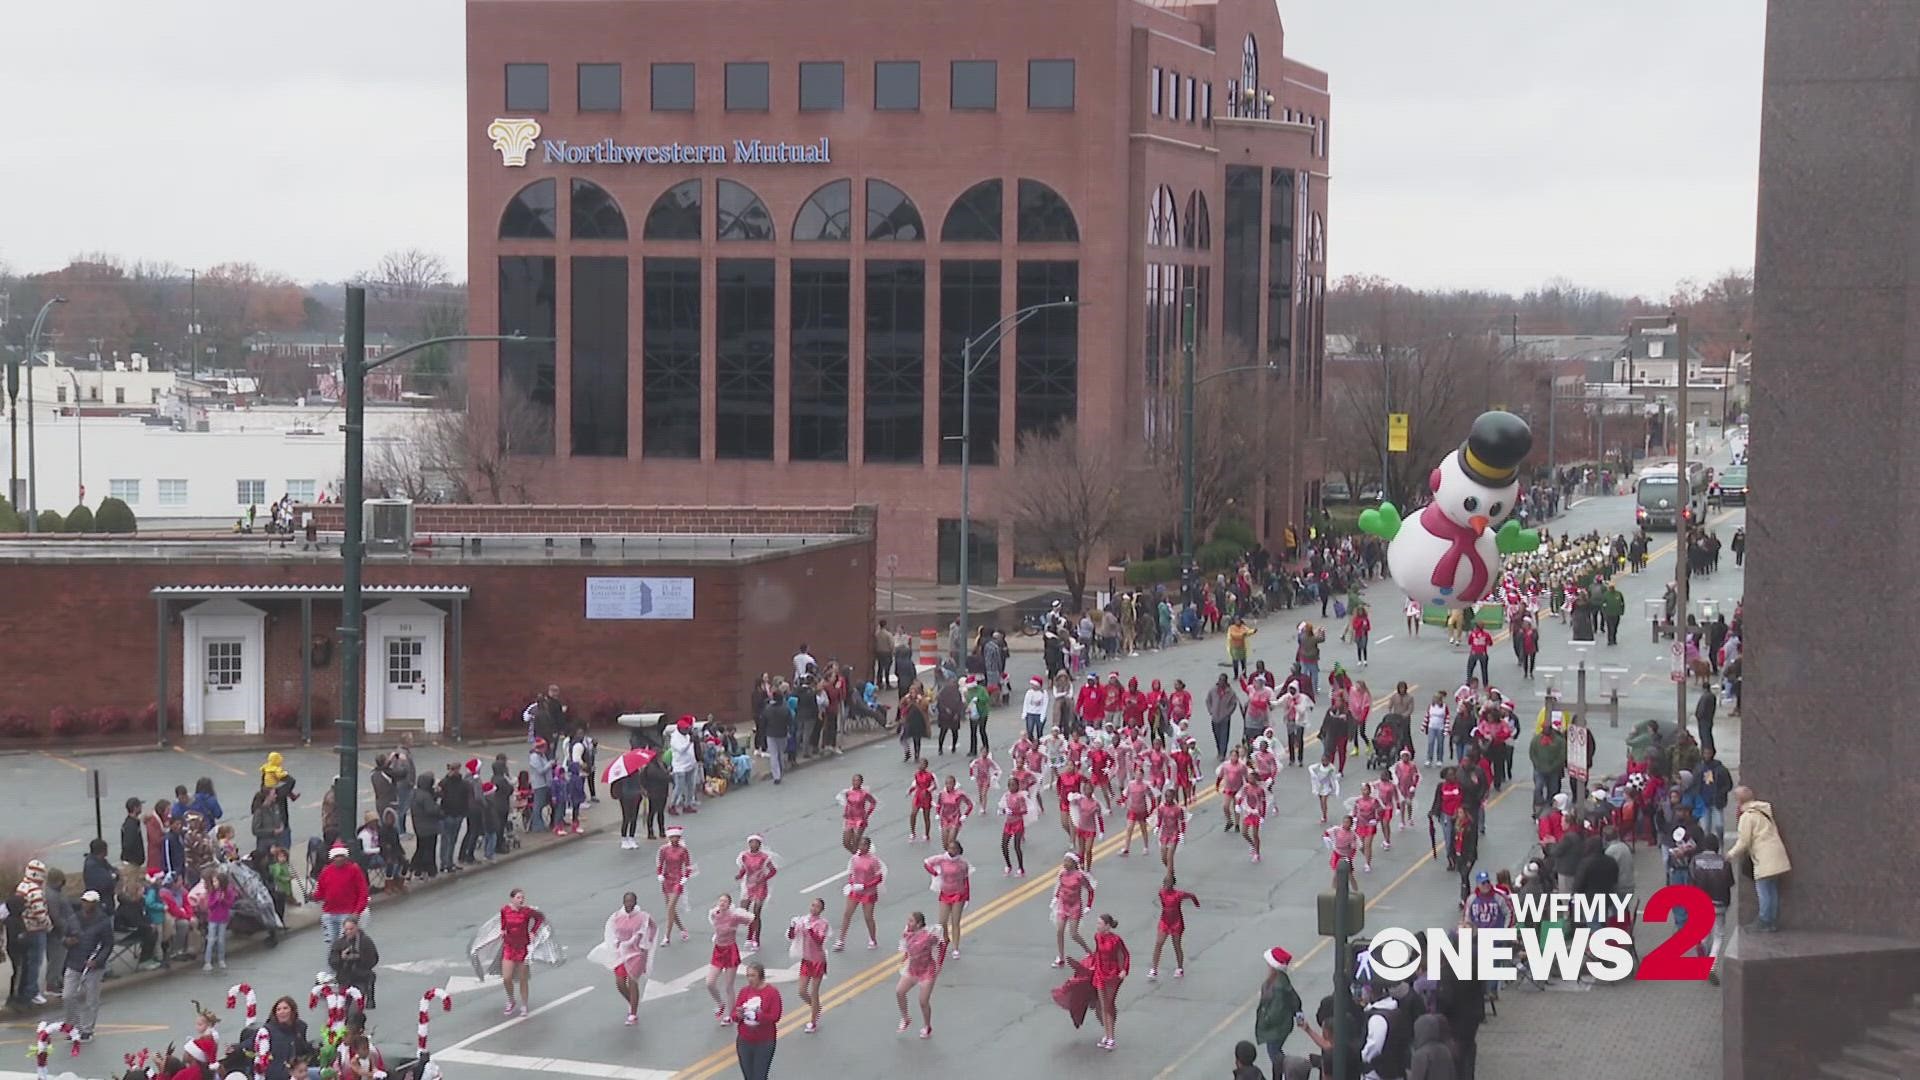 WFMY News 2’s Jay Capers captured all the sights and sounds out at the parade in Downtown Greensboro Saturday.